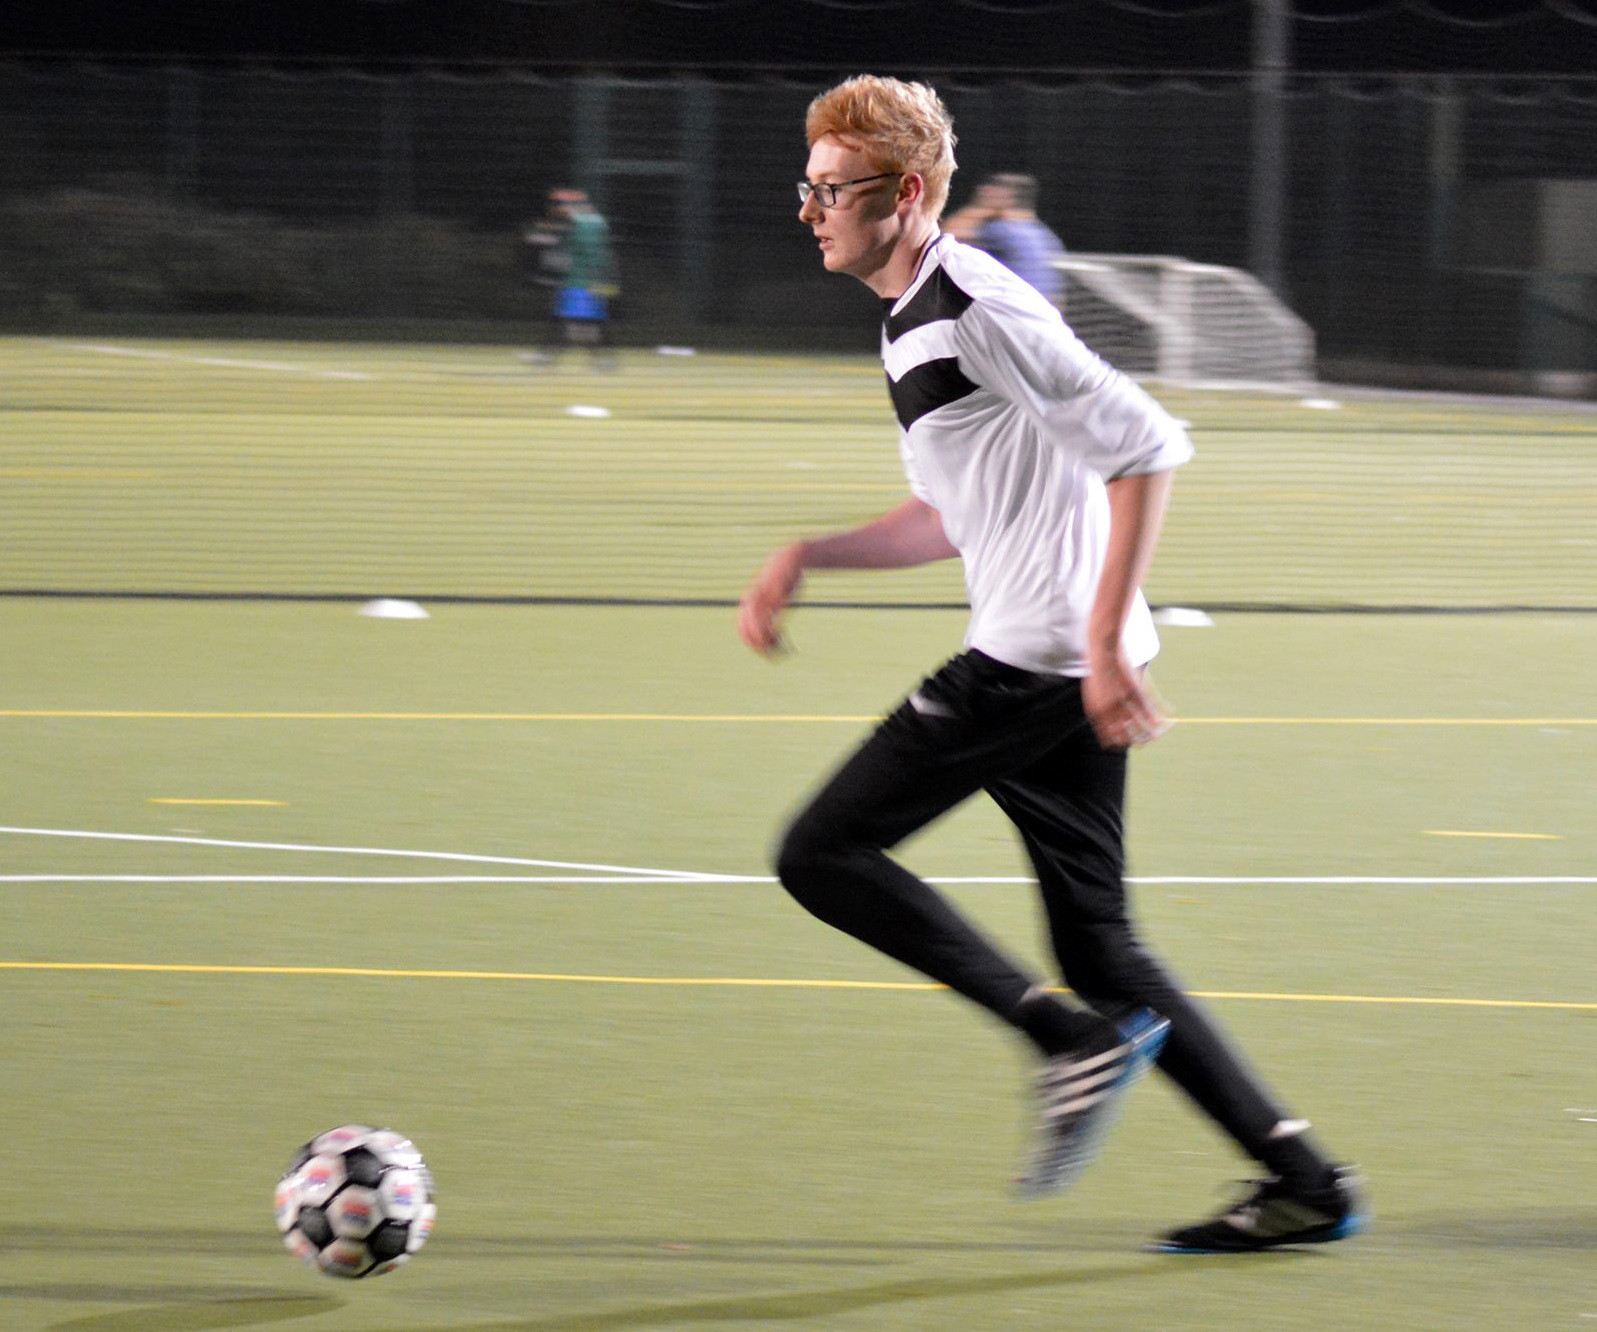 ON THE BALL: Loftus Cheeky Nando’s attack during their 5-1 win on Monday night. Photo by ANDREW RUDD